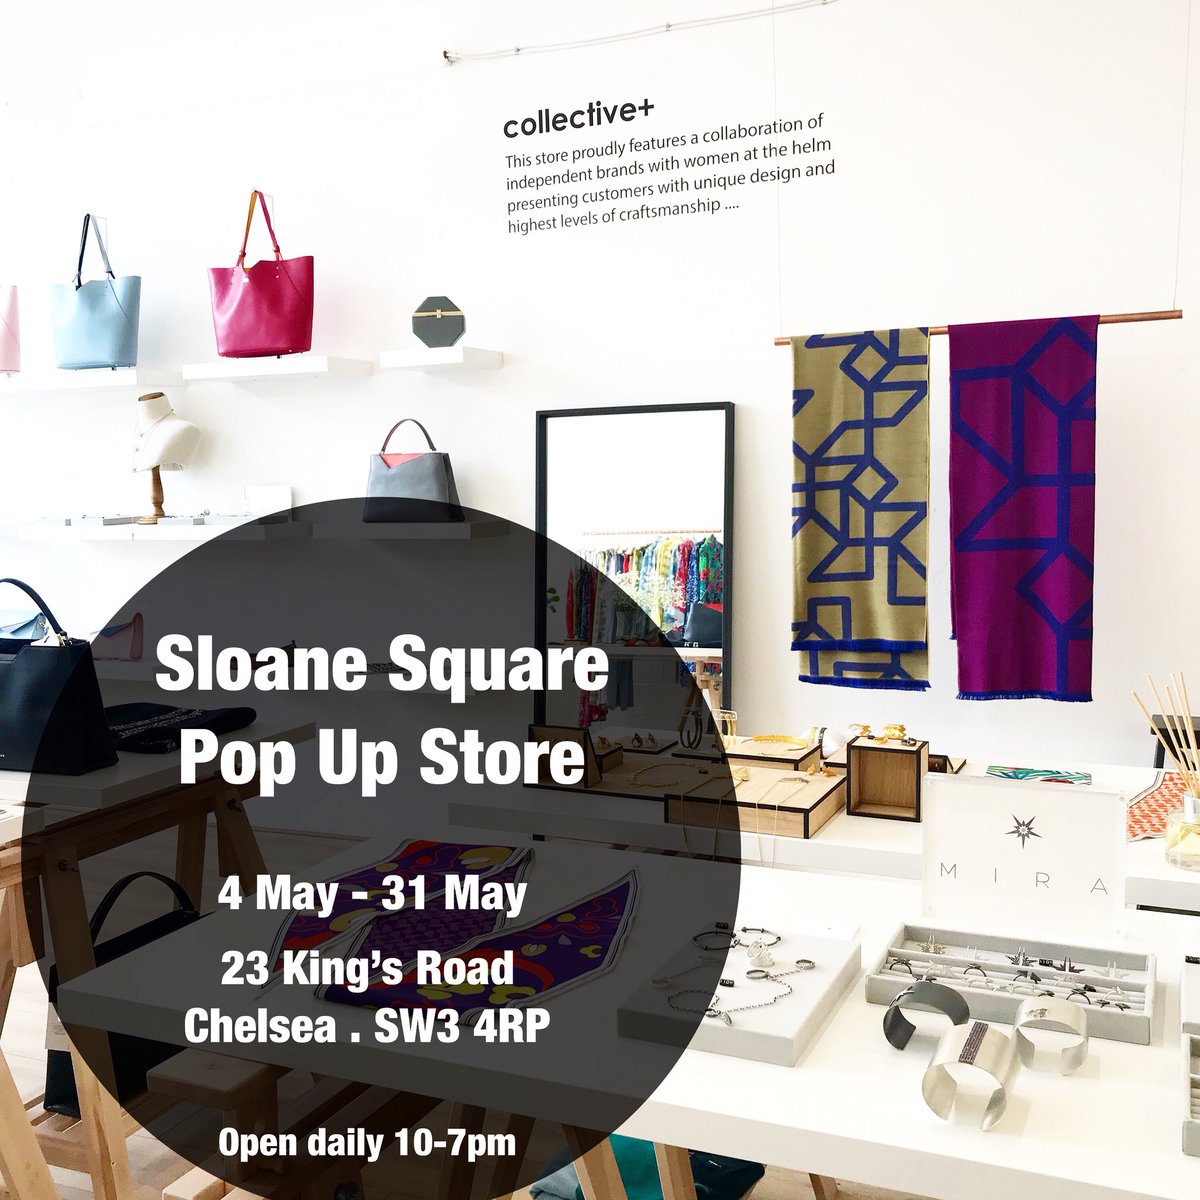 Visit our pop up store for beautiful collections of #bags #scarves #shoes #loungewear #swimwear #cashmere #beachwear #jewellery. #popupshop #popuplondon #popupsto #londonpopup #londonbrands #londonfashion #chelsea #chelseashopping #chelseaflowershow #flowershow #kensington